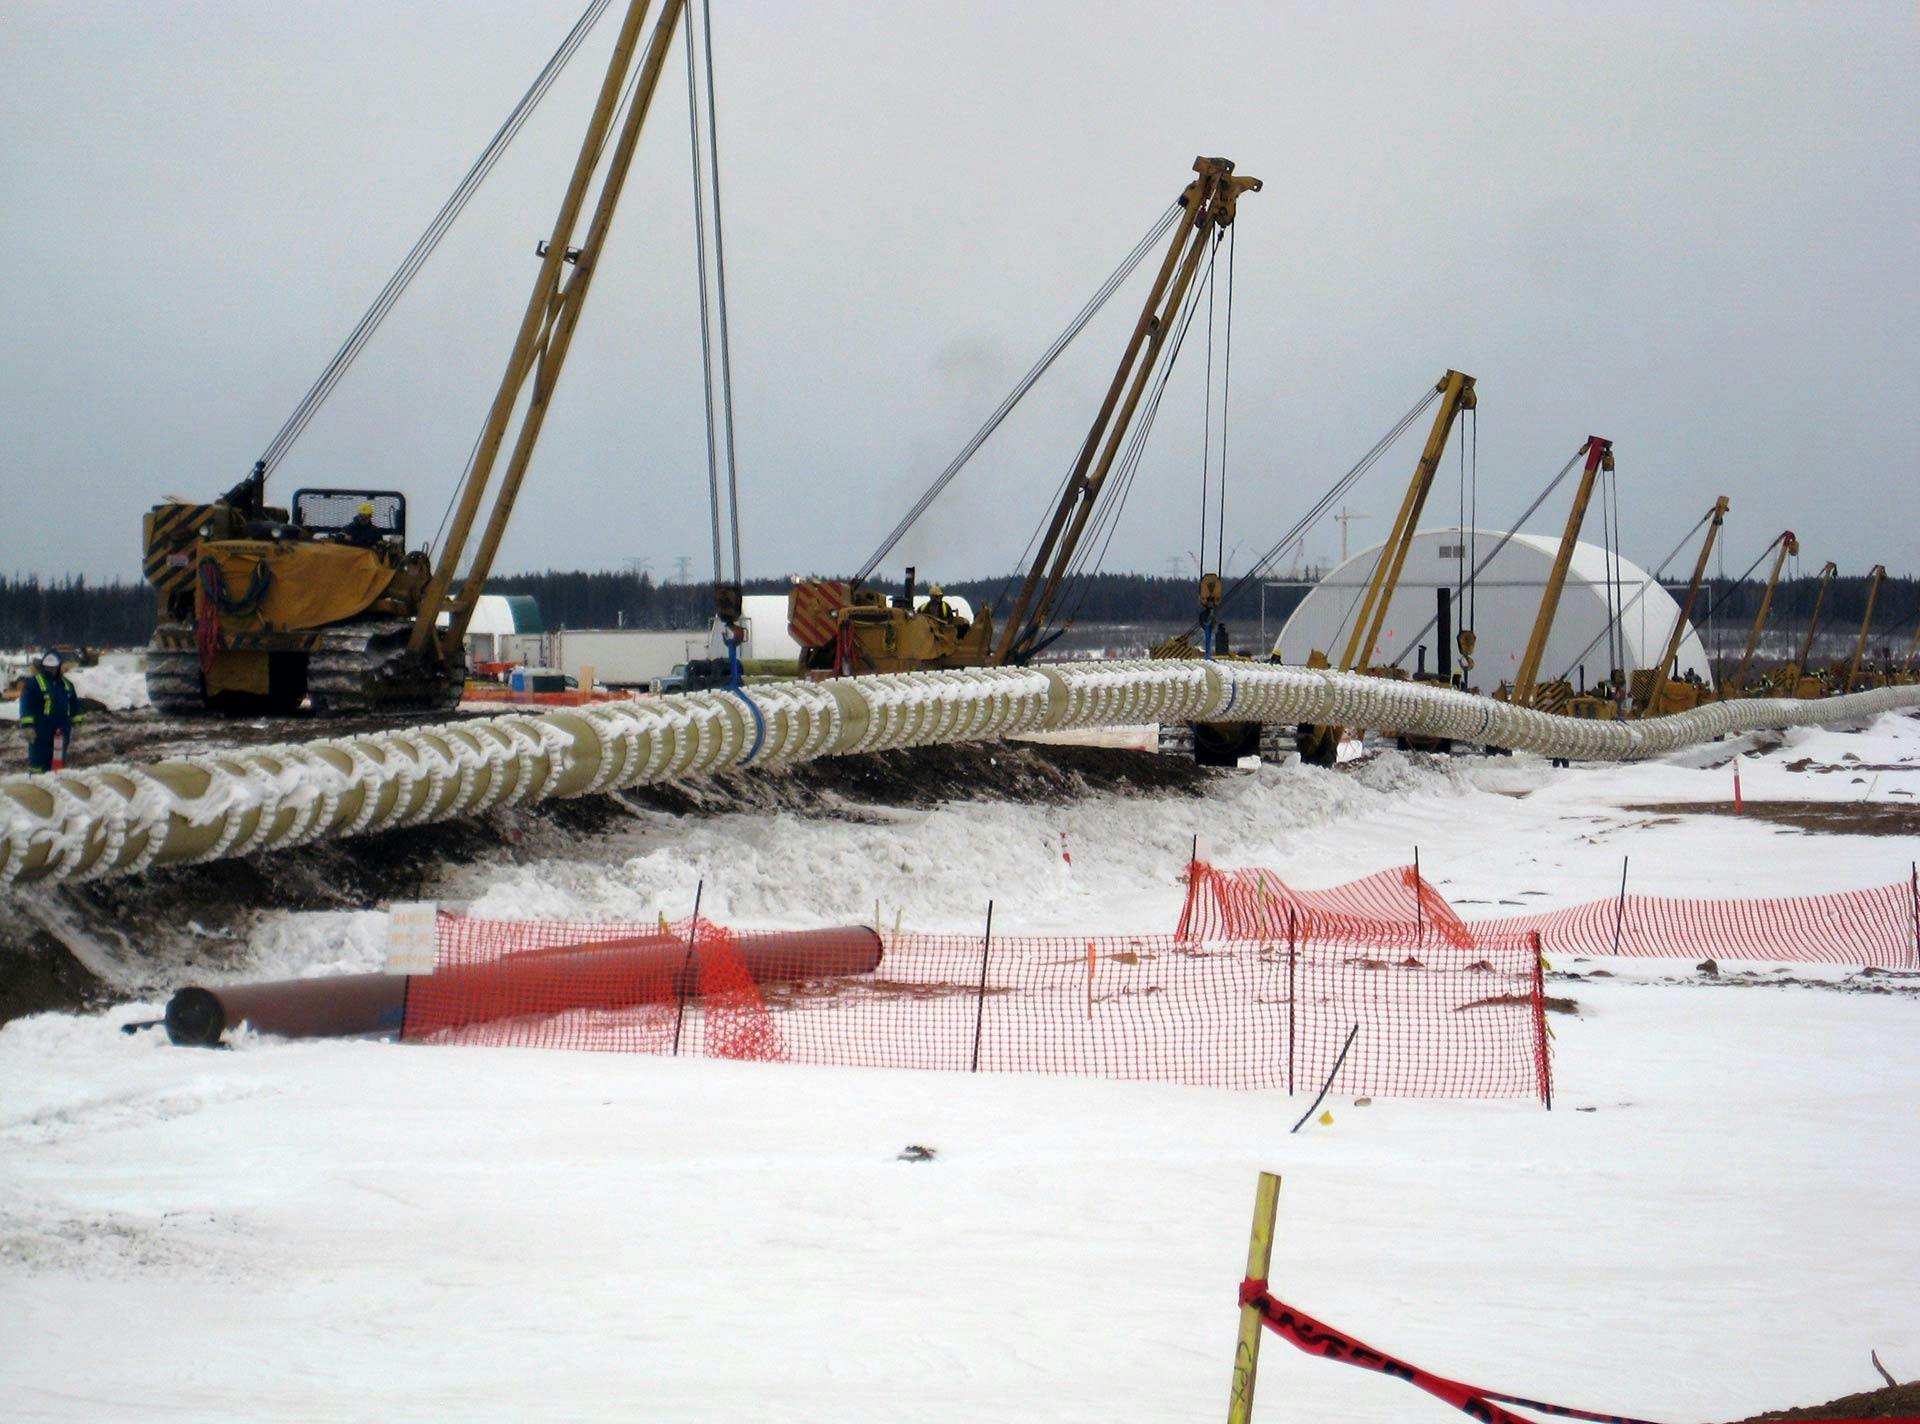 A line of Green Thread Fiberglass Pipe being laid in a snowy landscape